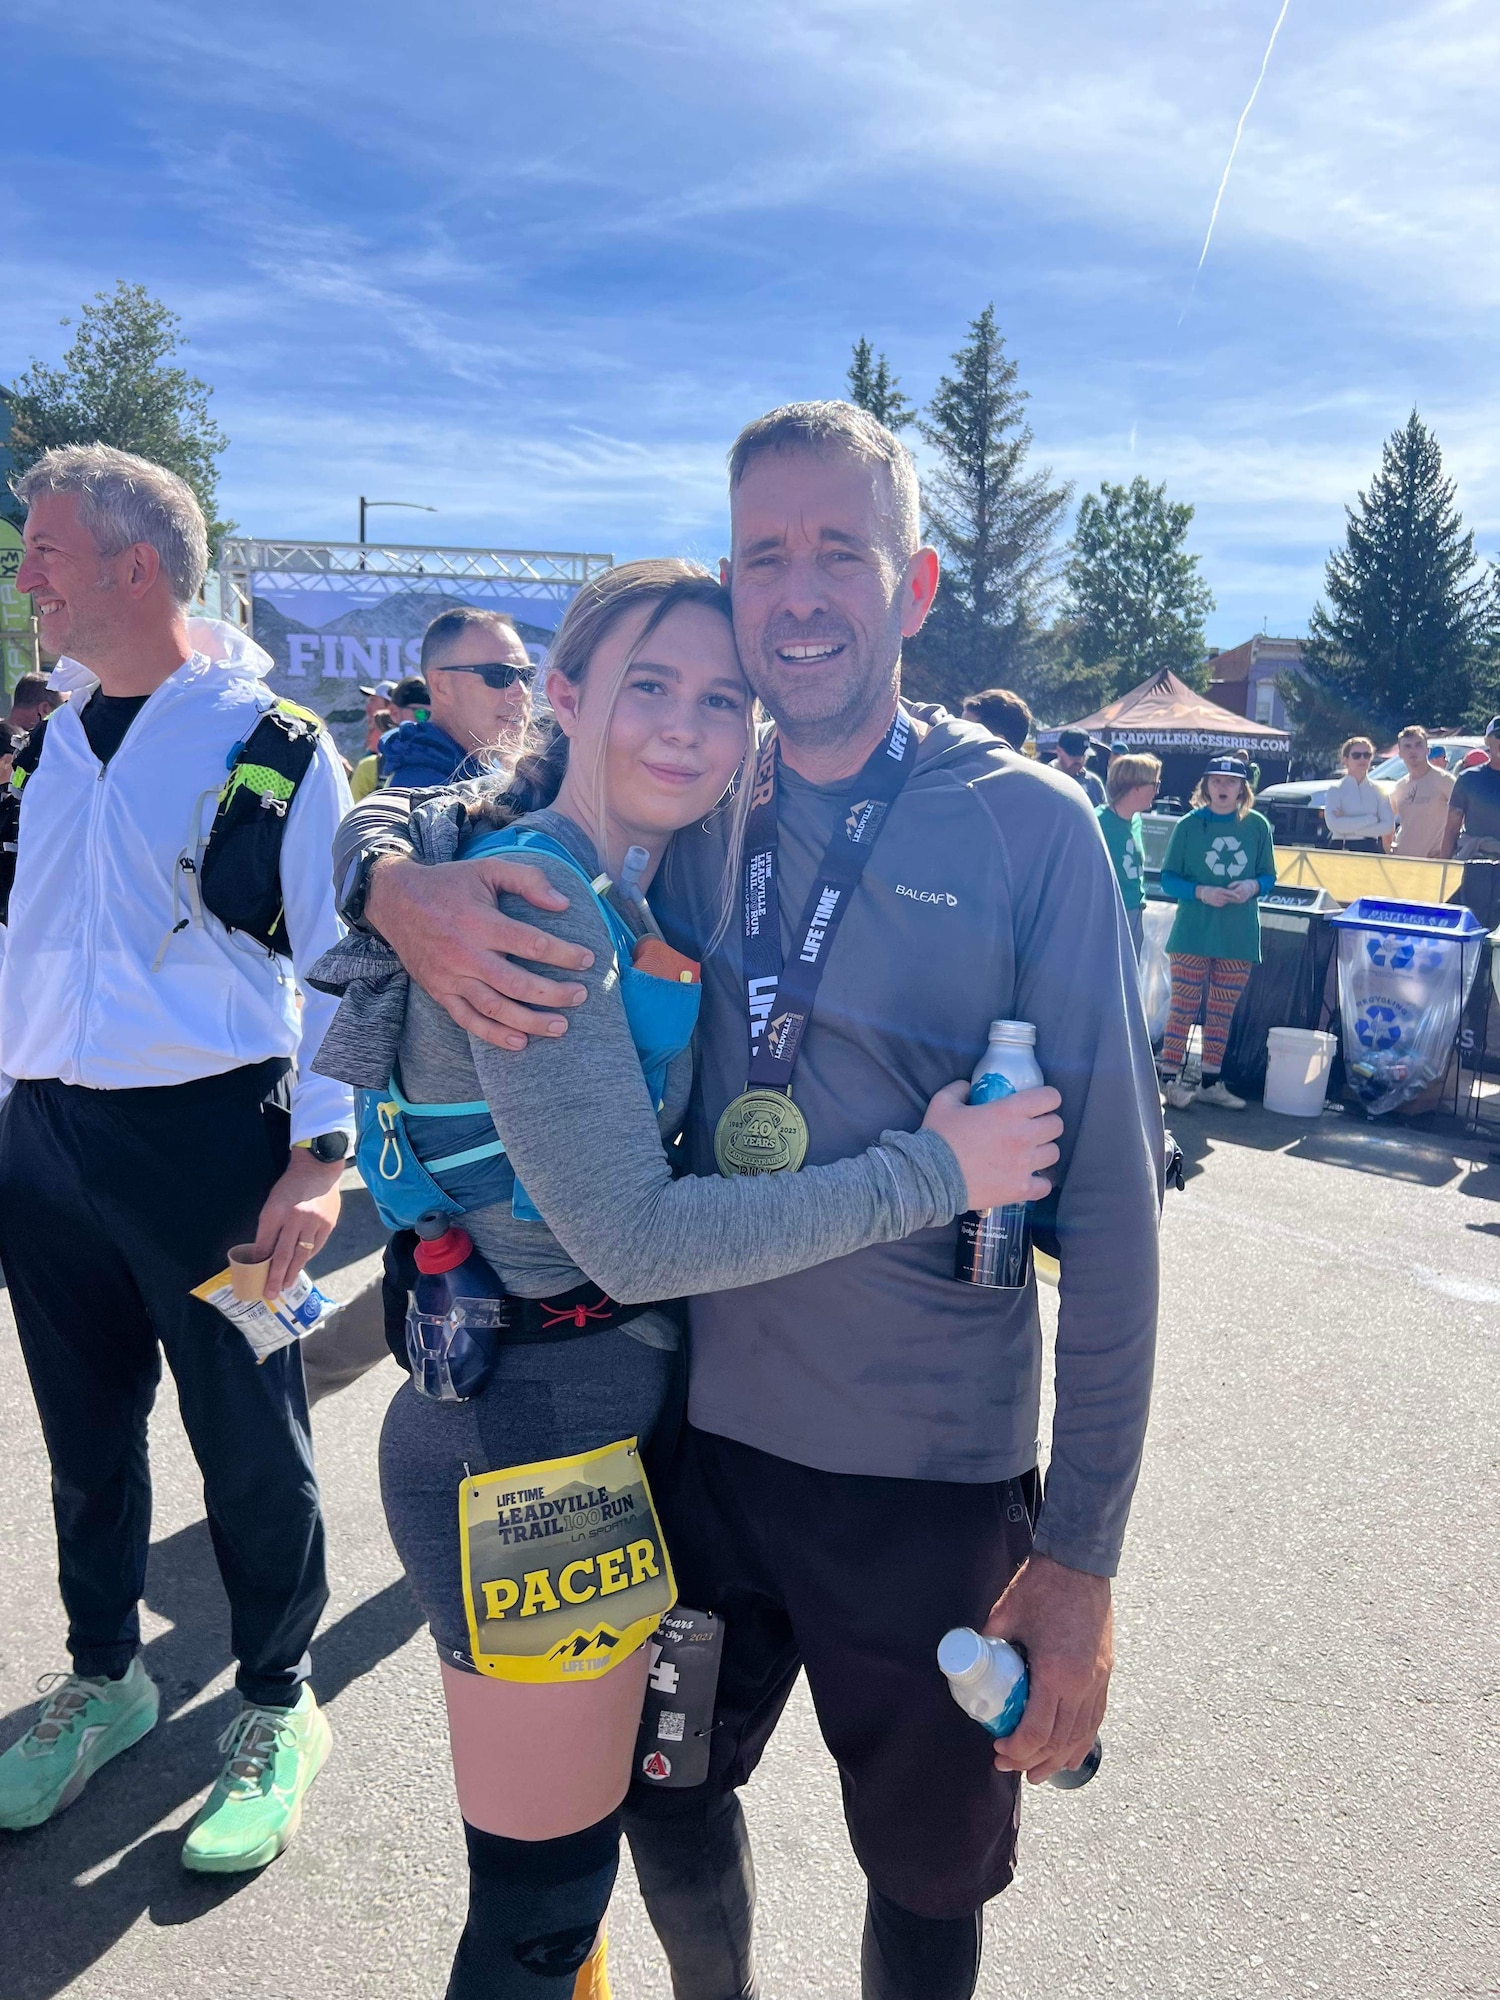 Patrick Buzzard, 4th Test and Evaluation Squadron security manager, right, and his daughter, Hailey Buzzard, left, pose for a photo after crossing the finish line of the Leadville Trail 100 Run near Leadville, Colorado, Aug. 20, 2023. Hailey paced her father for the final 12.4 miles of the race. The Leadville Trail 100 Run is an ultramarathon held annually on rugged trails and dirt roads through the heart of the Rocky Mountains. The course is a 50-mile out-and-back dogleg run primarily on the Colorado Trail, starting at 10,200 feet. The centerpiece of the course is the climb up to Hope Pass at 12,620 feet, encountered on both the outbound trek and on the return. Buzzard finished the 100-mile course in 29 hours, 48 minutes, and 57 seconds, just beating the 30-hour time limit. (Courtesy photo)